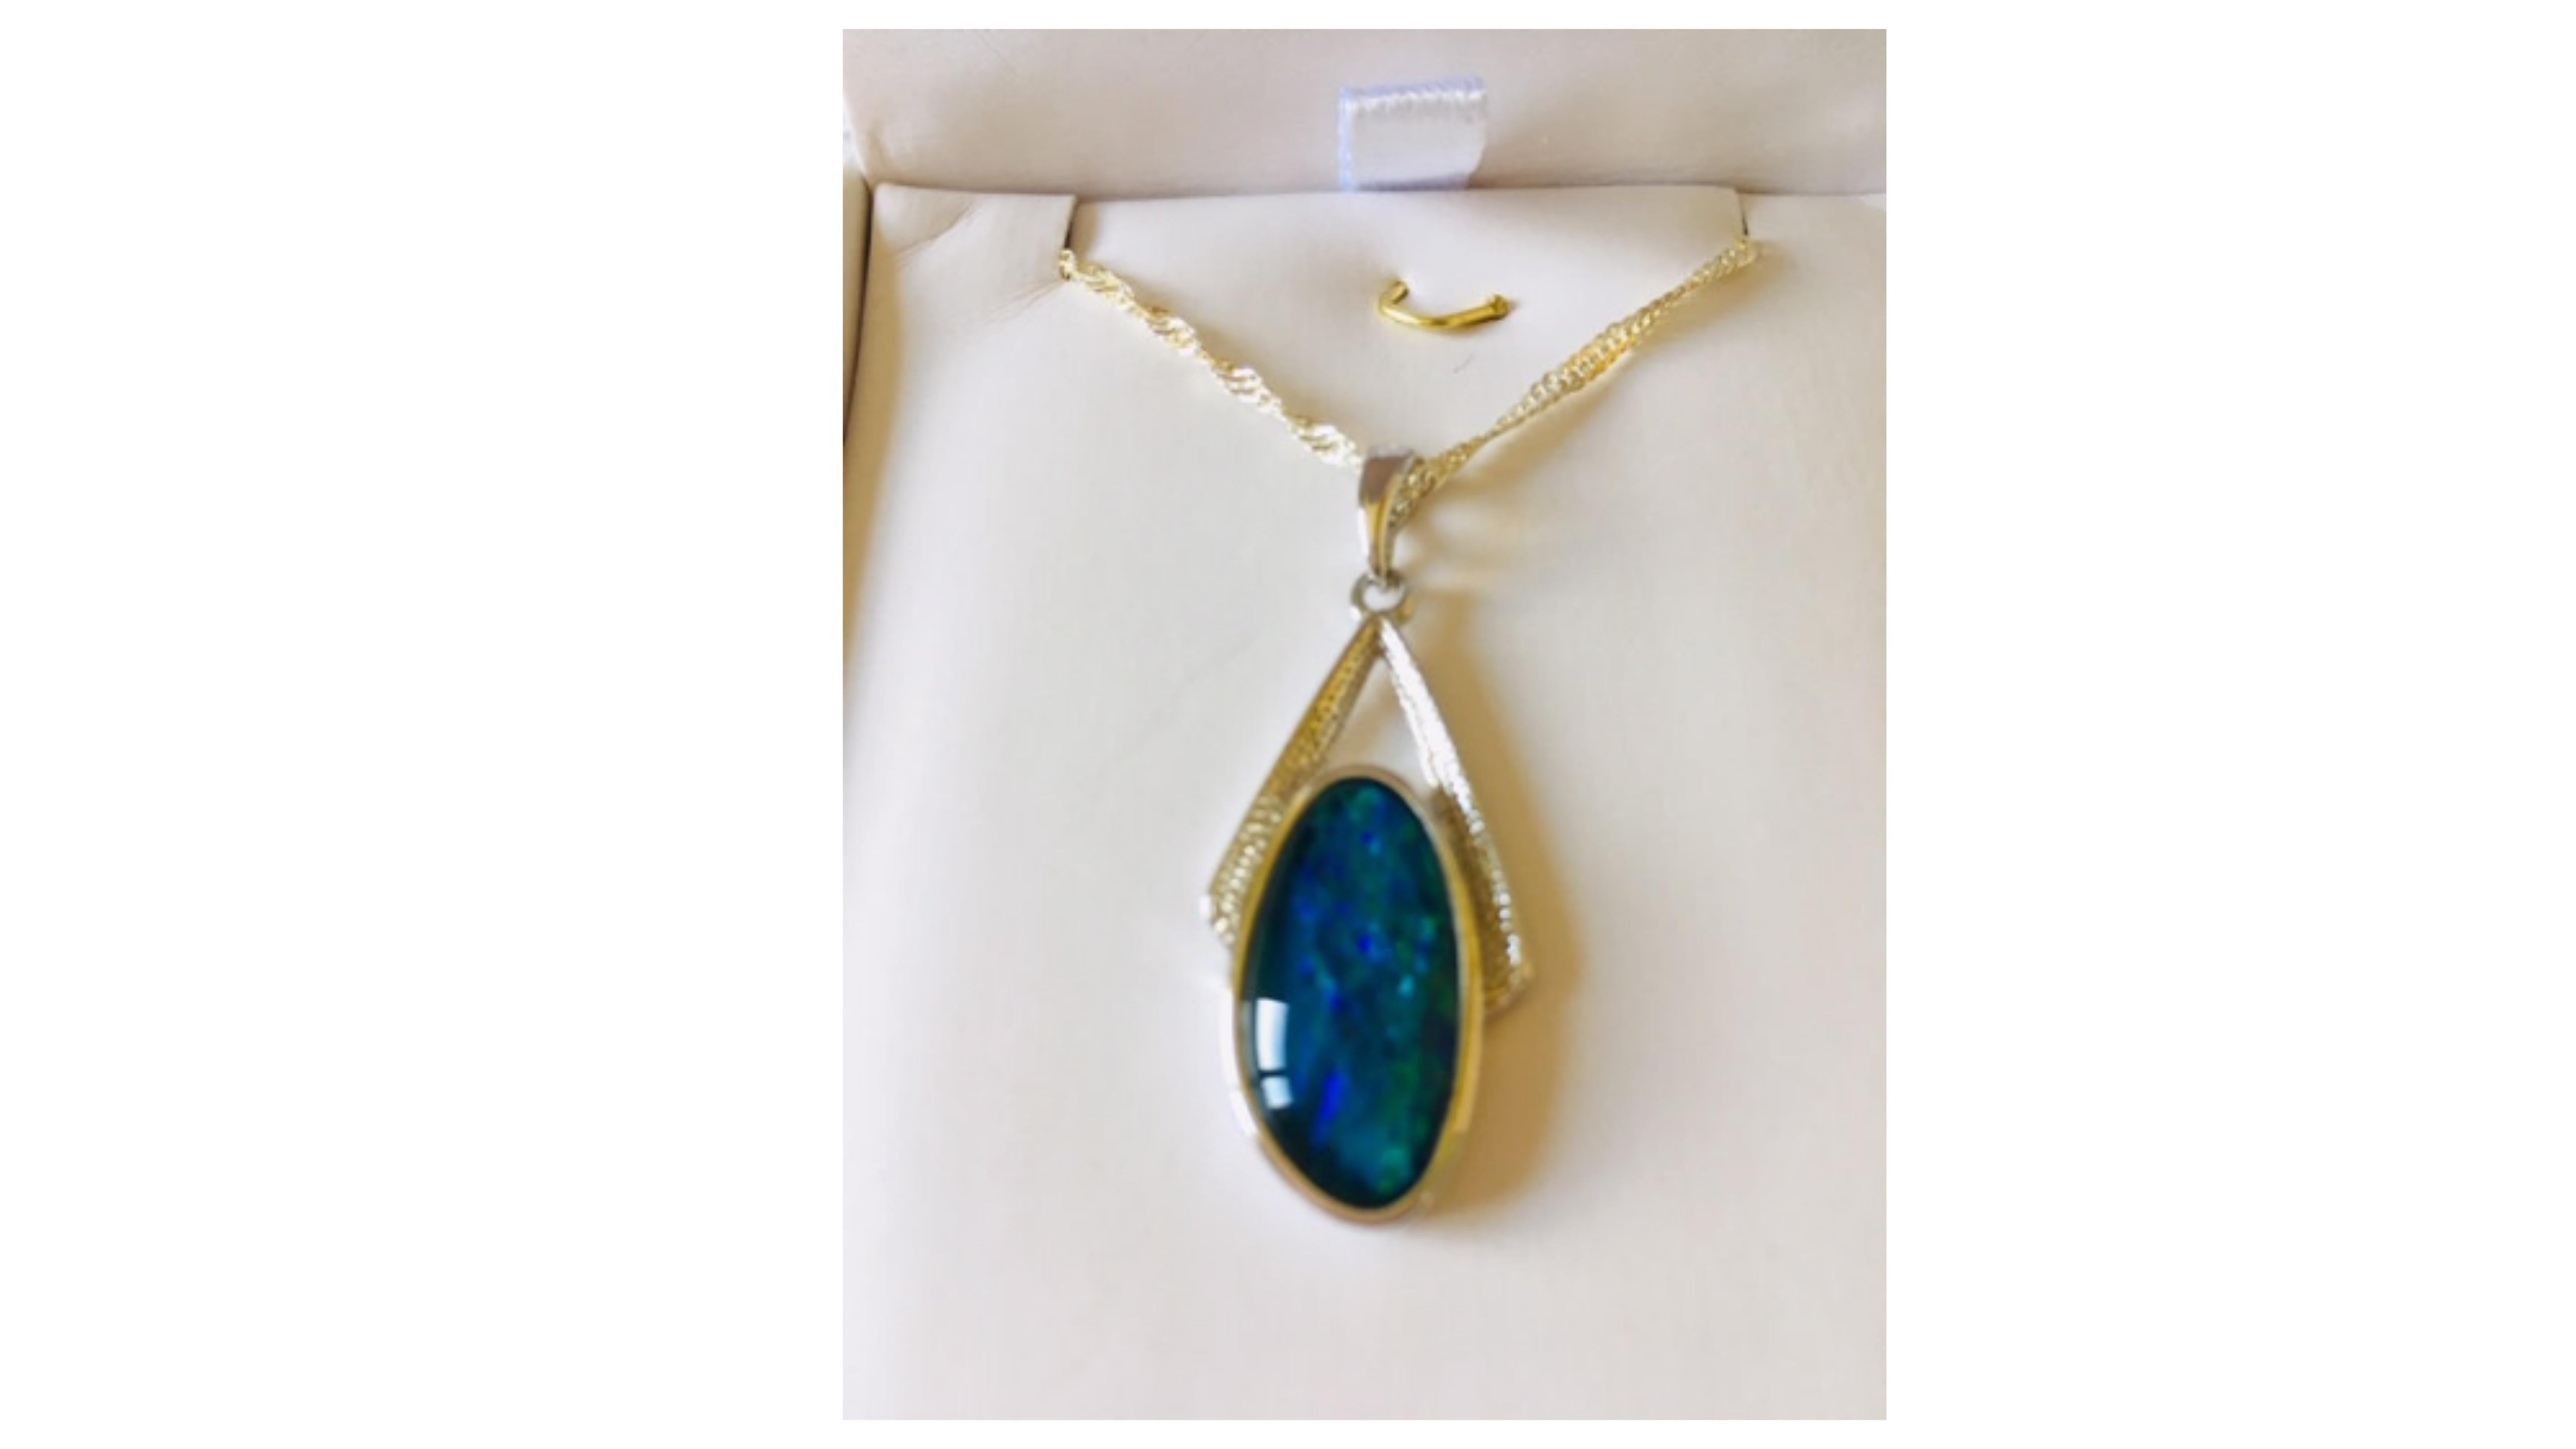 This is a unique Australian opal which shows off bright colors blue green and stands out  with the accent stones.   The vast majority comes from coober pedy in south Australia.  Its set in sterling silver and this is a one off item.

We have many